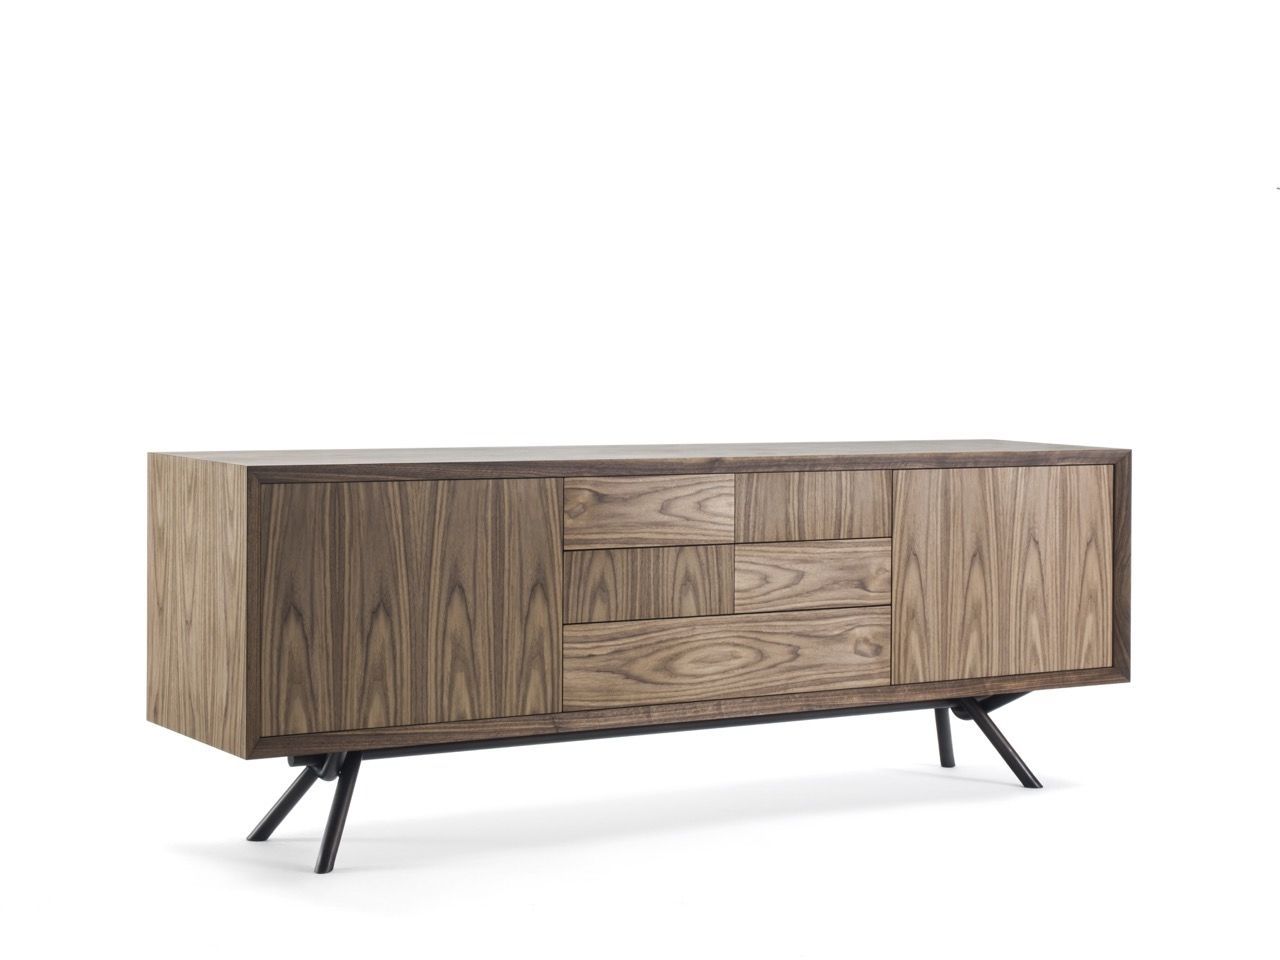 Riva 1920 | Natural Living | Kauri | Briccole Intended For 2018 Iron Sideboards (View 14 of 20)